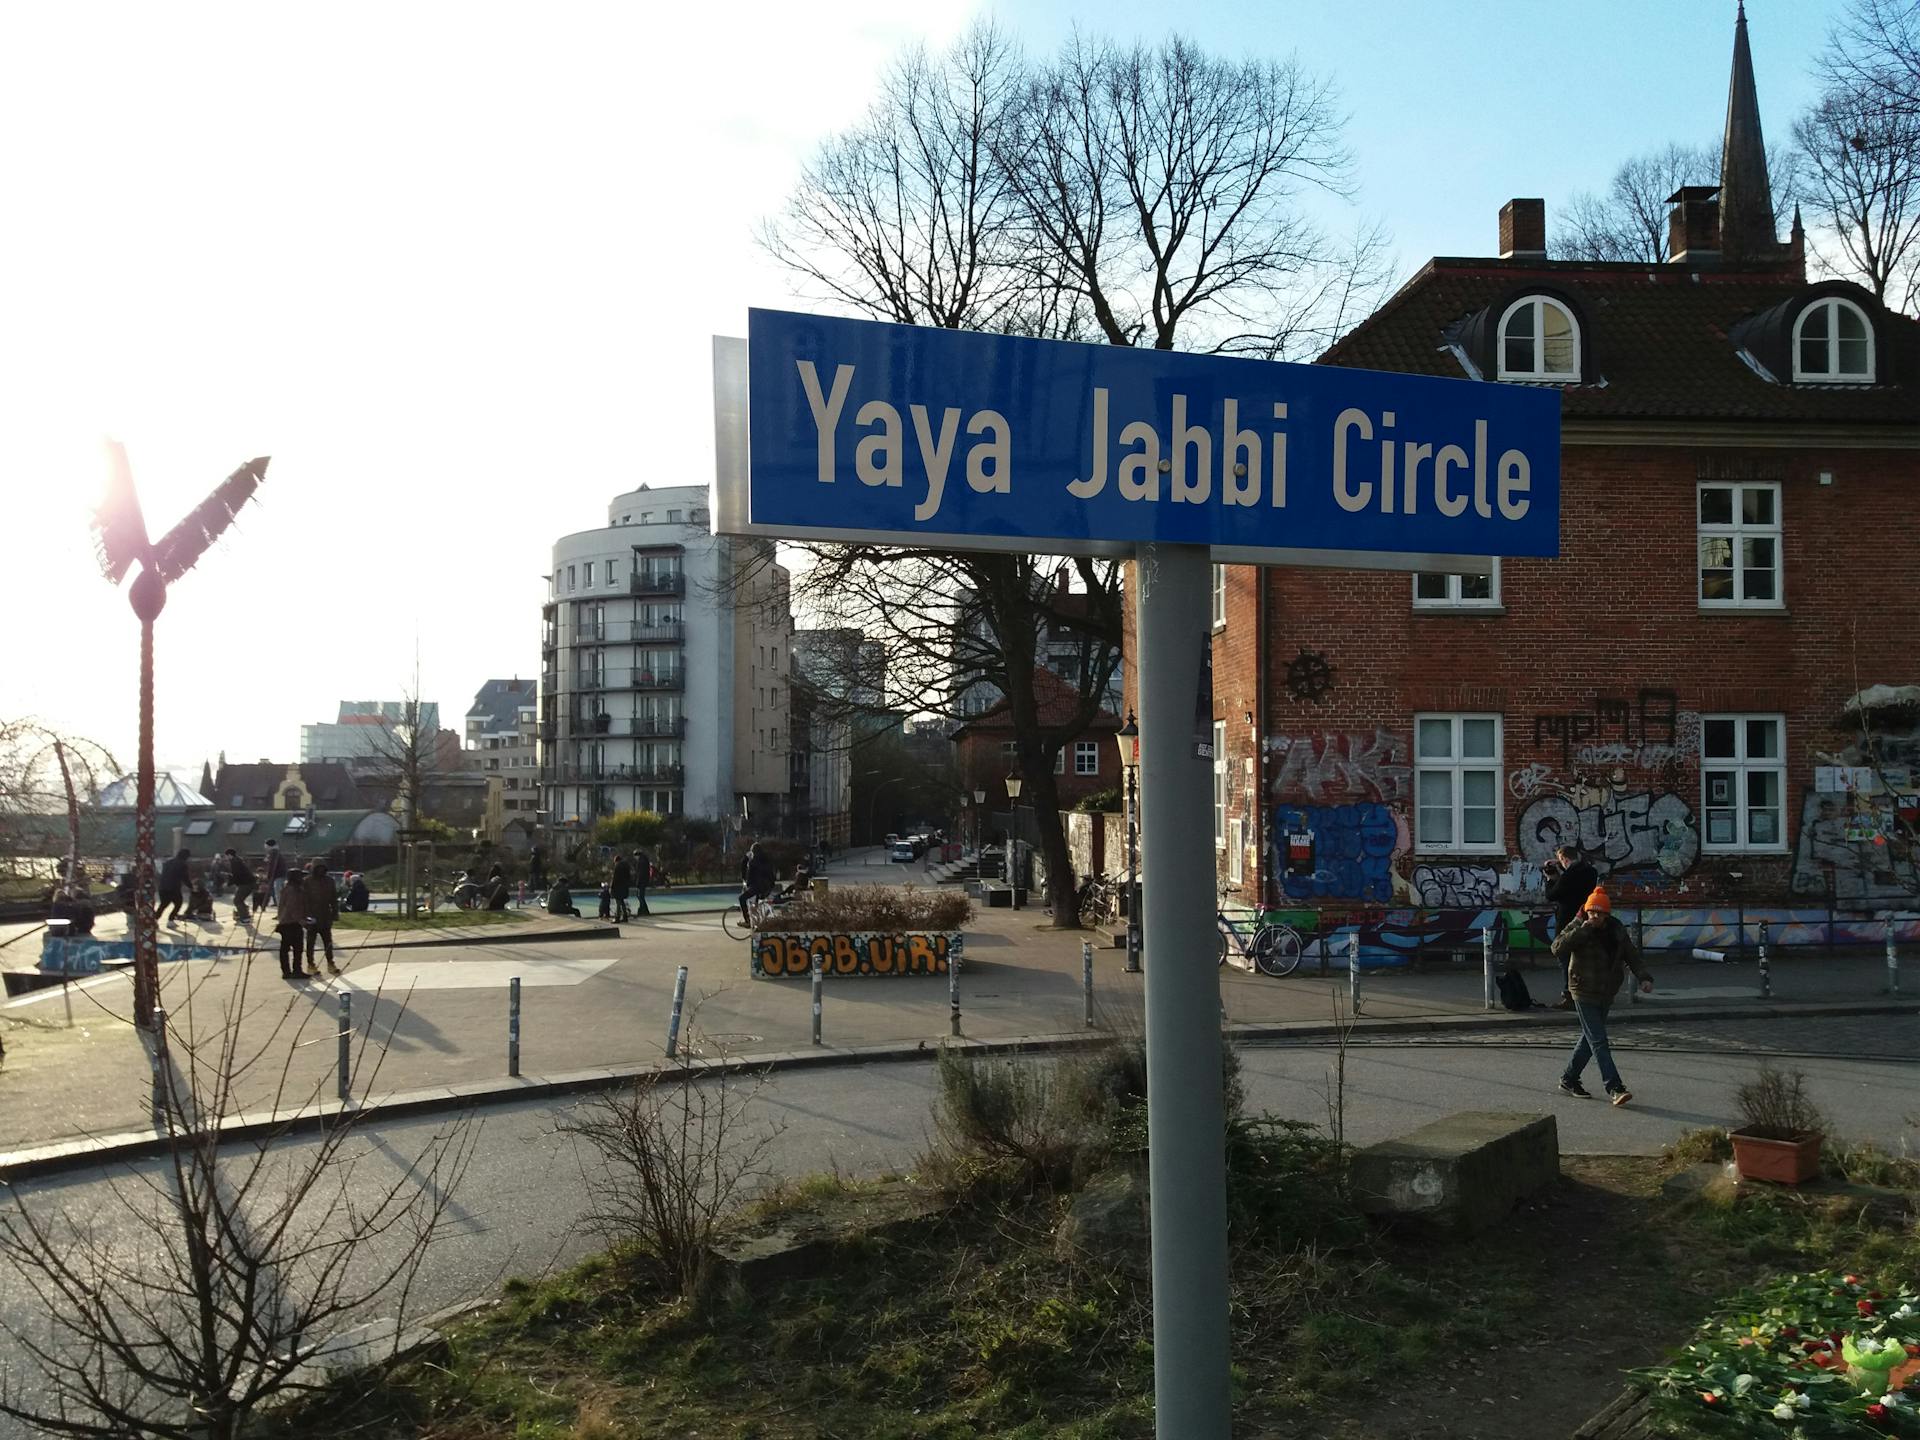 Close up photo of the 'Yaya Jabbi Circle'-street sign on a sunny day. Park Fiction in the background